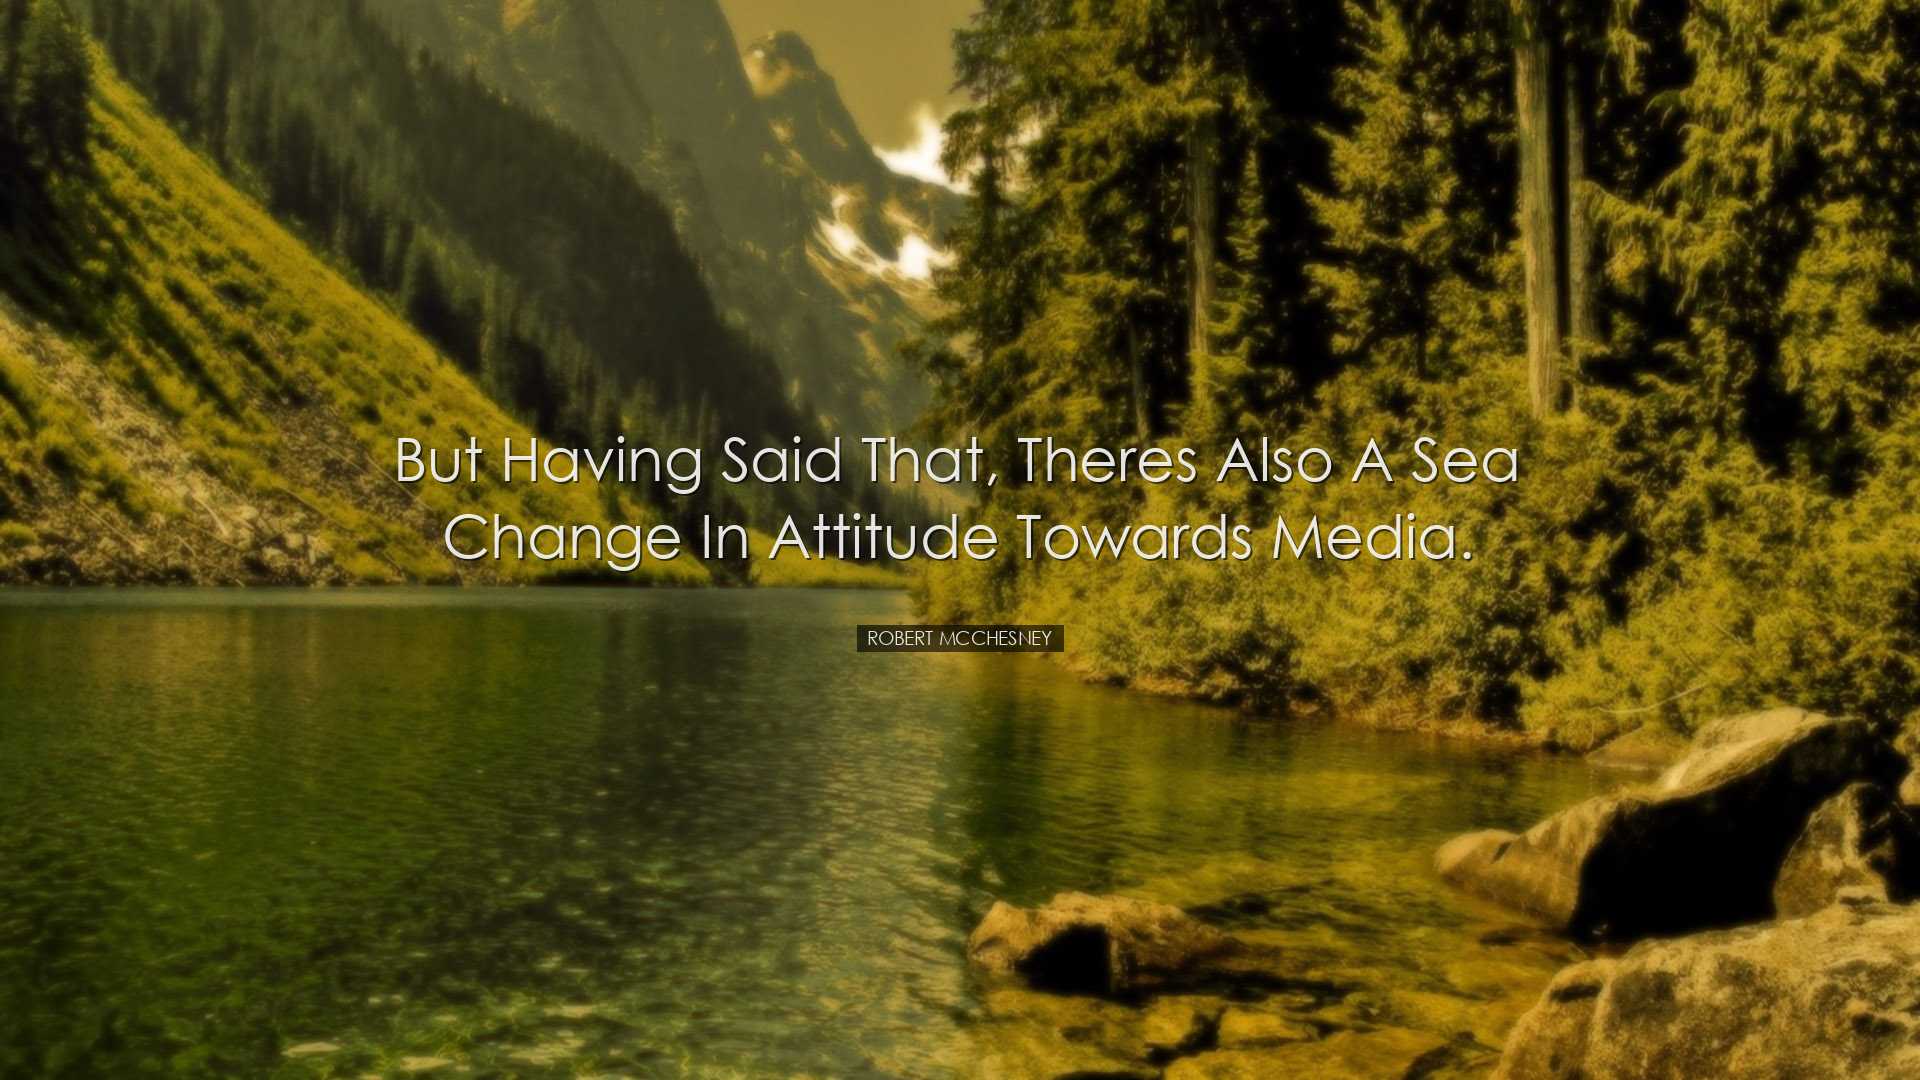 But having said that, theres also a sea change in attitude towards